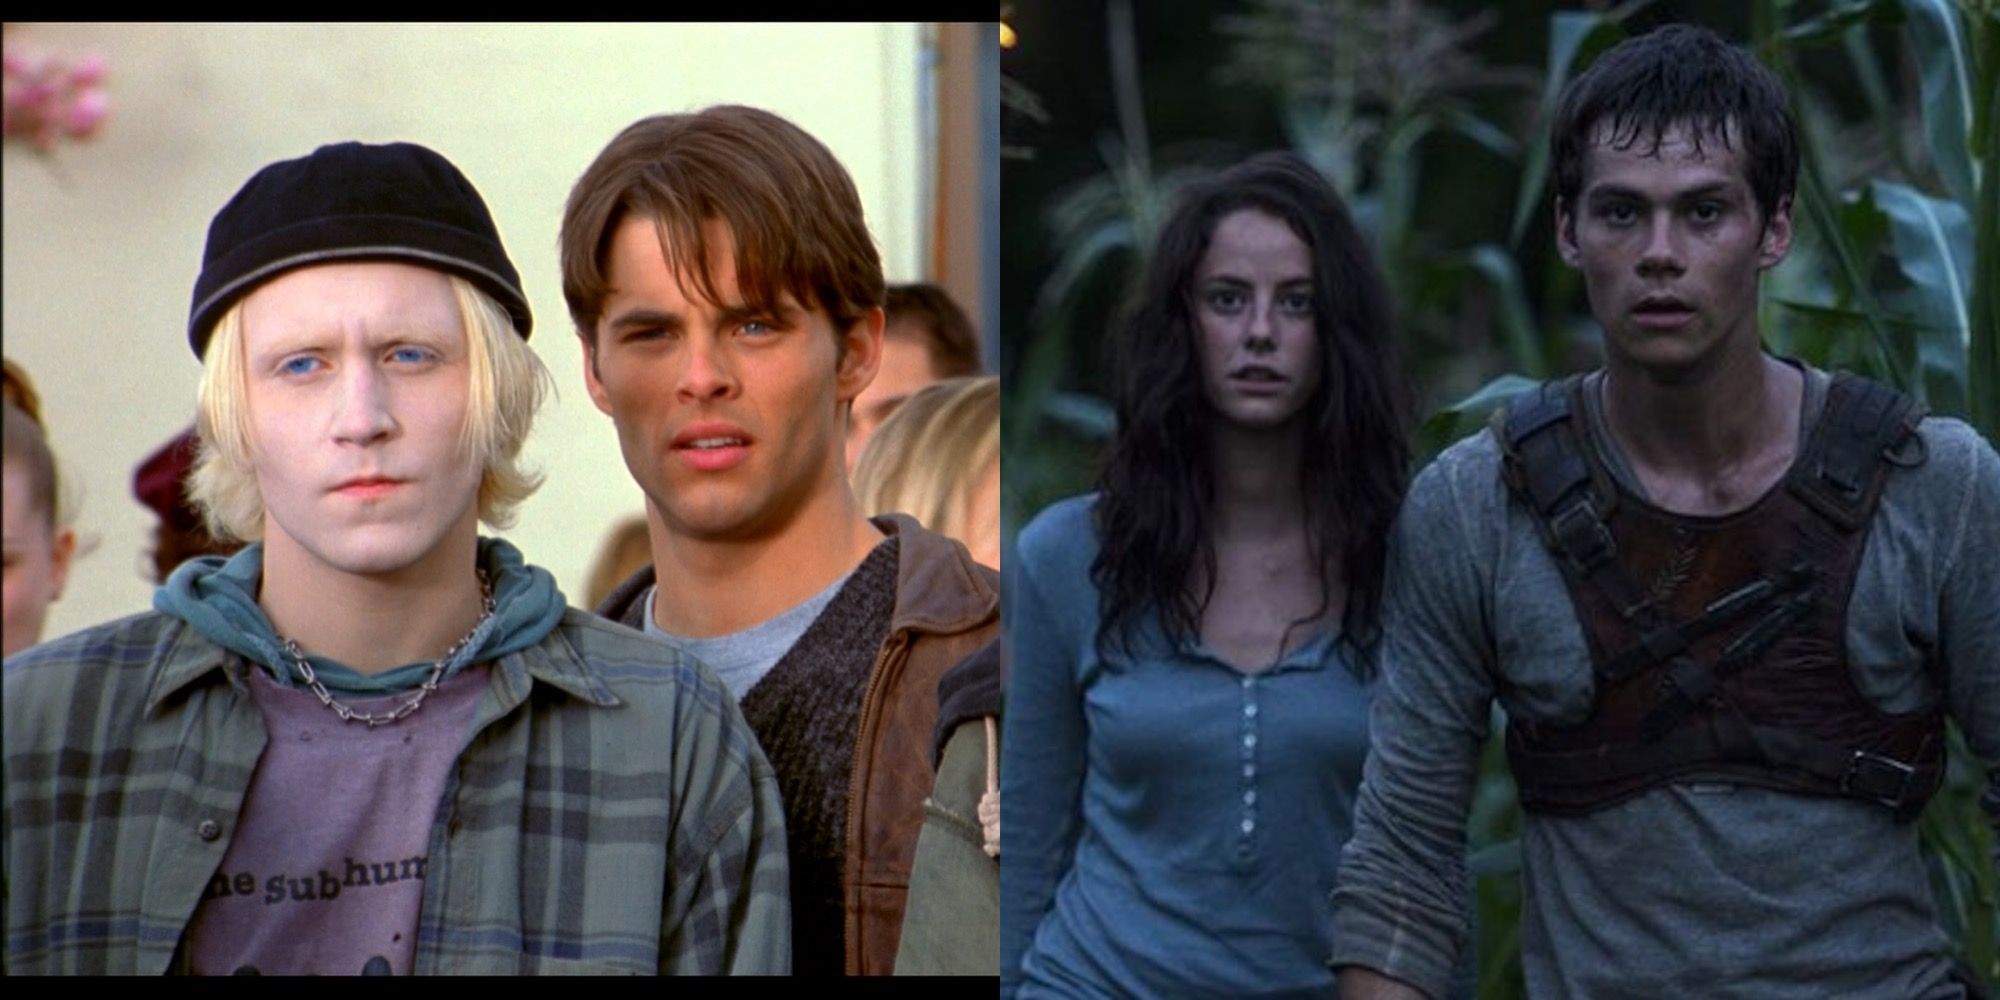 20 Best Sci-Fi/Fantasy Movies Like The Maze Runner You Need To See - IMDb